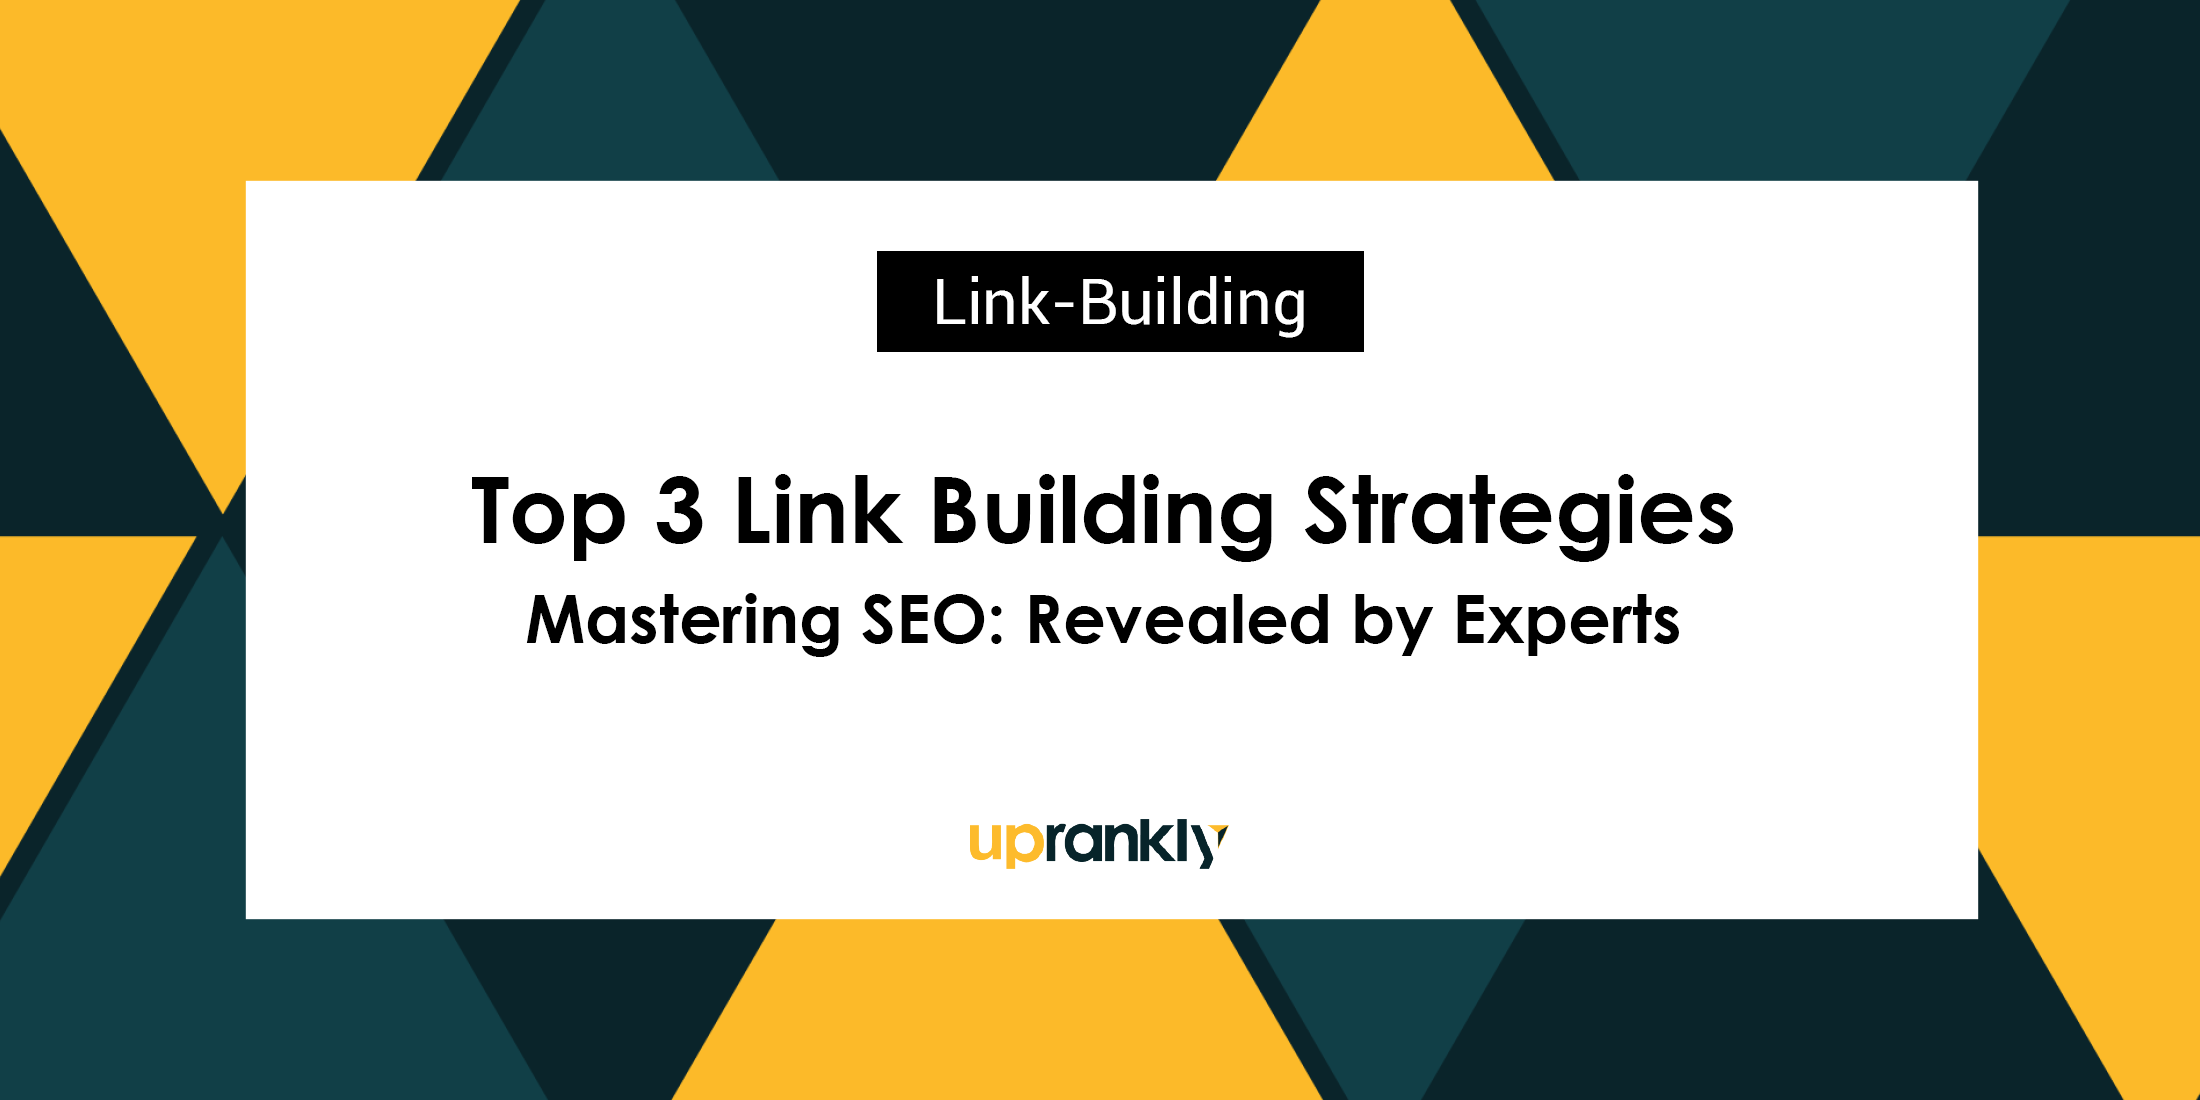 Mastering SEO: Top 3 Link Building Strategies Revealed by Experts